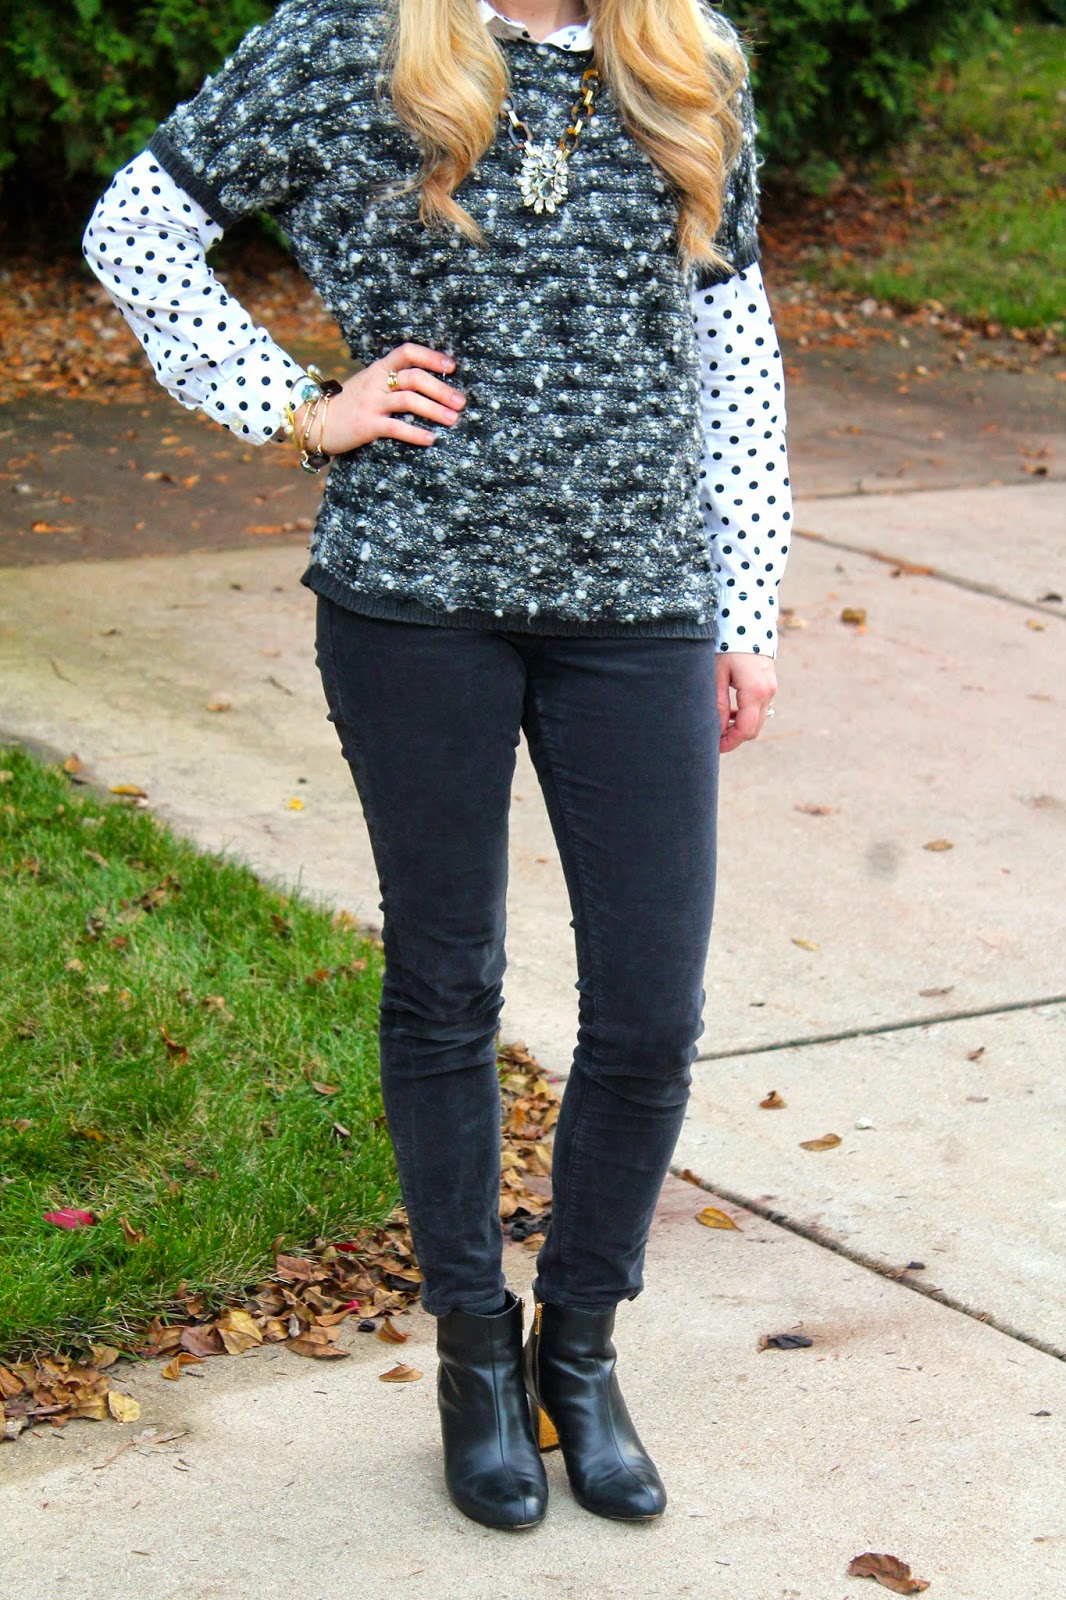 I do deClaire: Polka Dots Layered with Short Sleeve Sweater